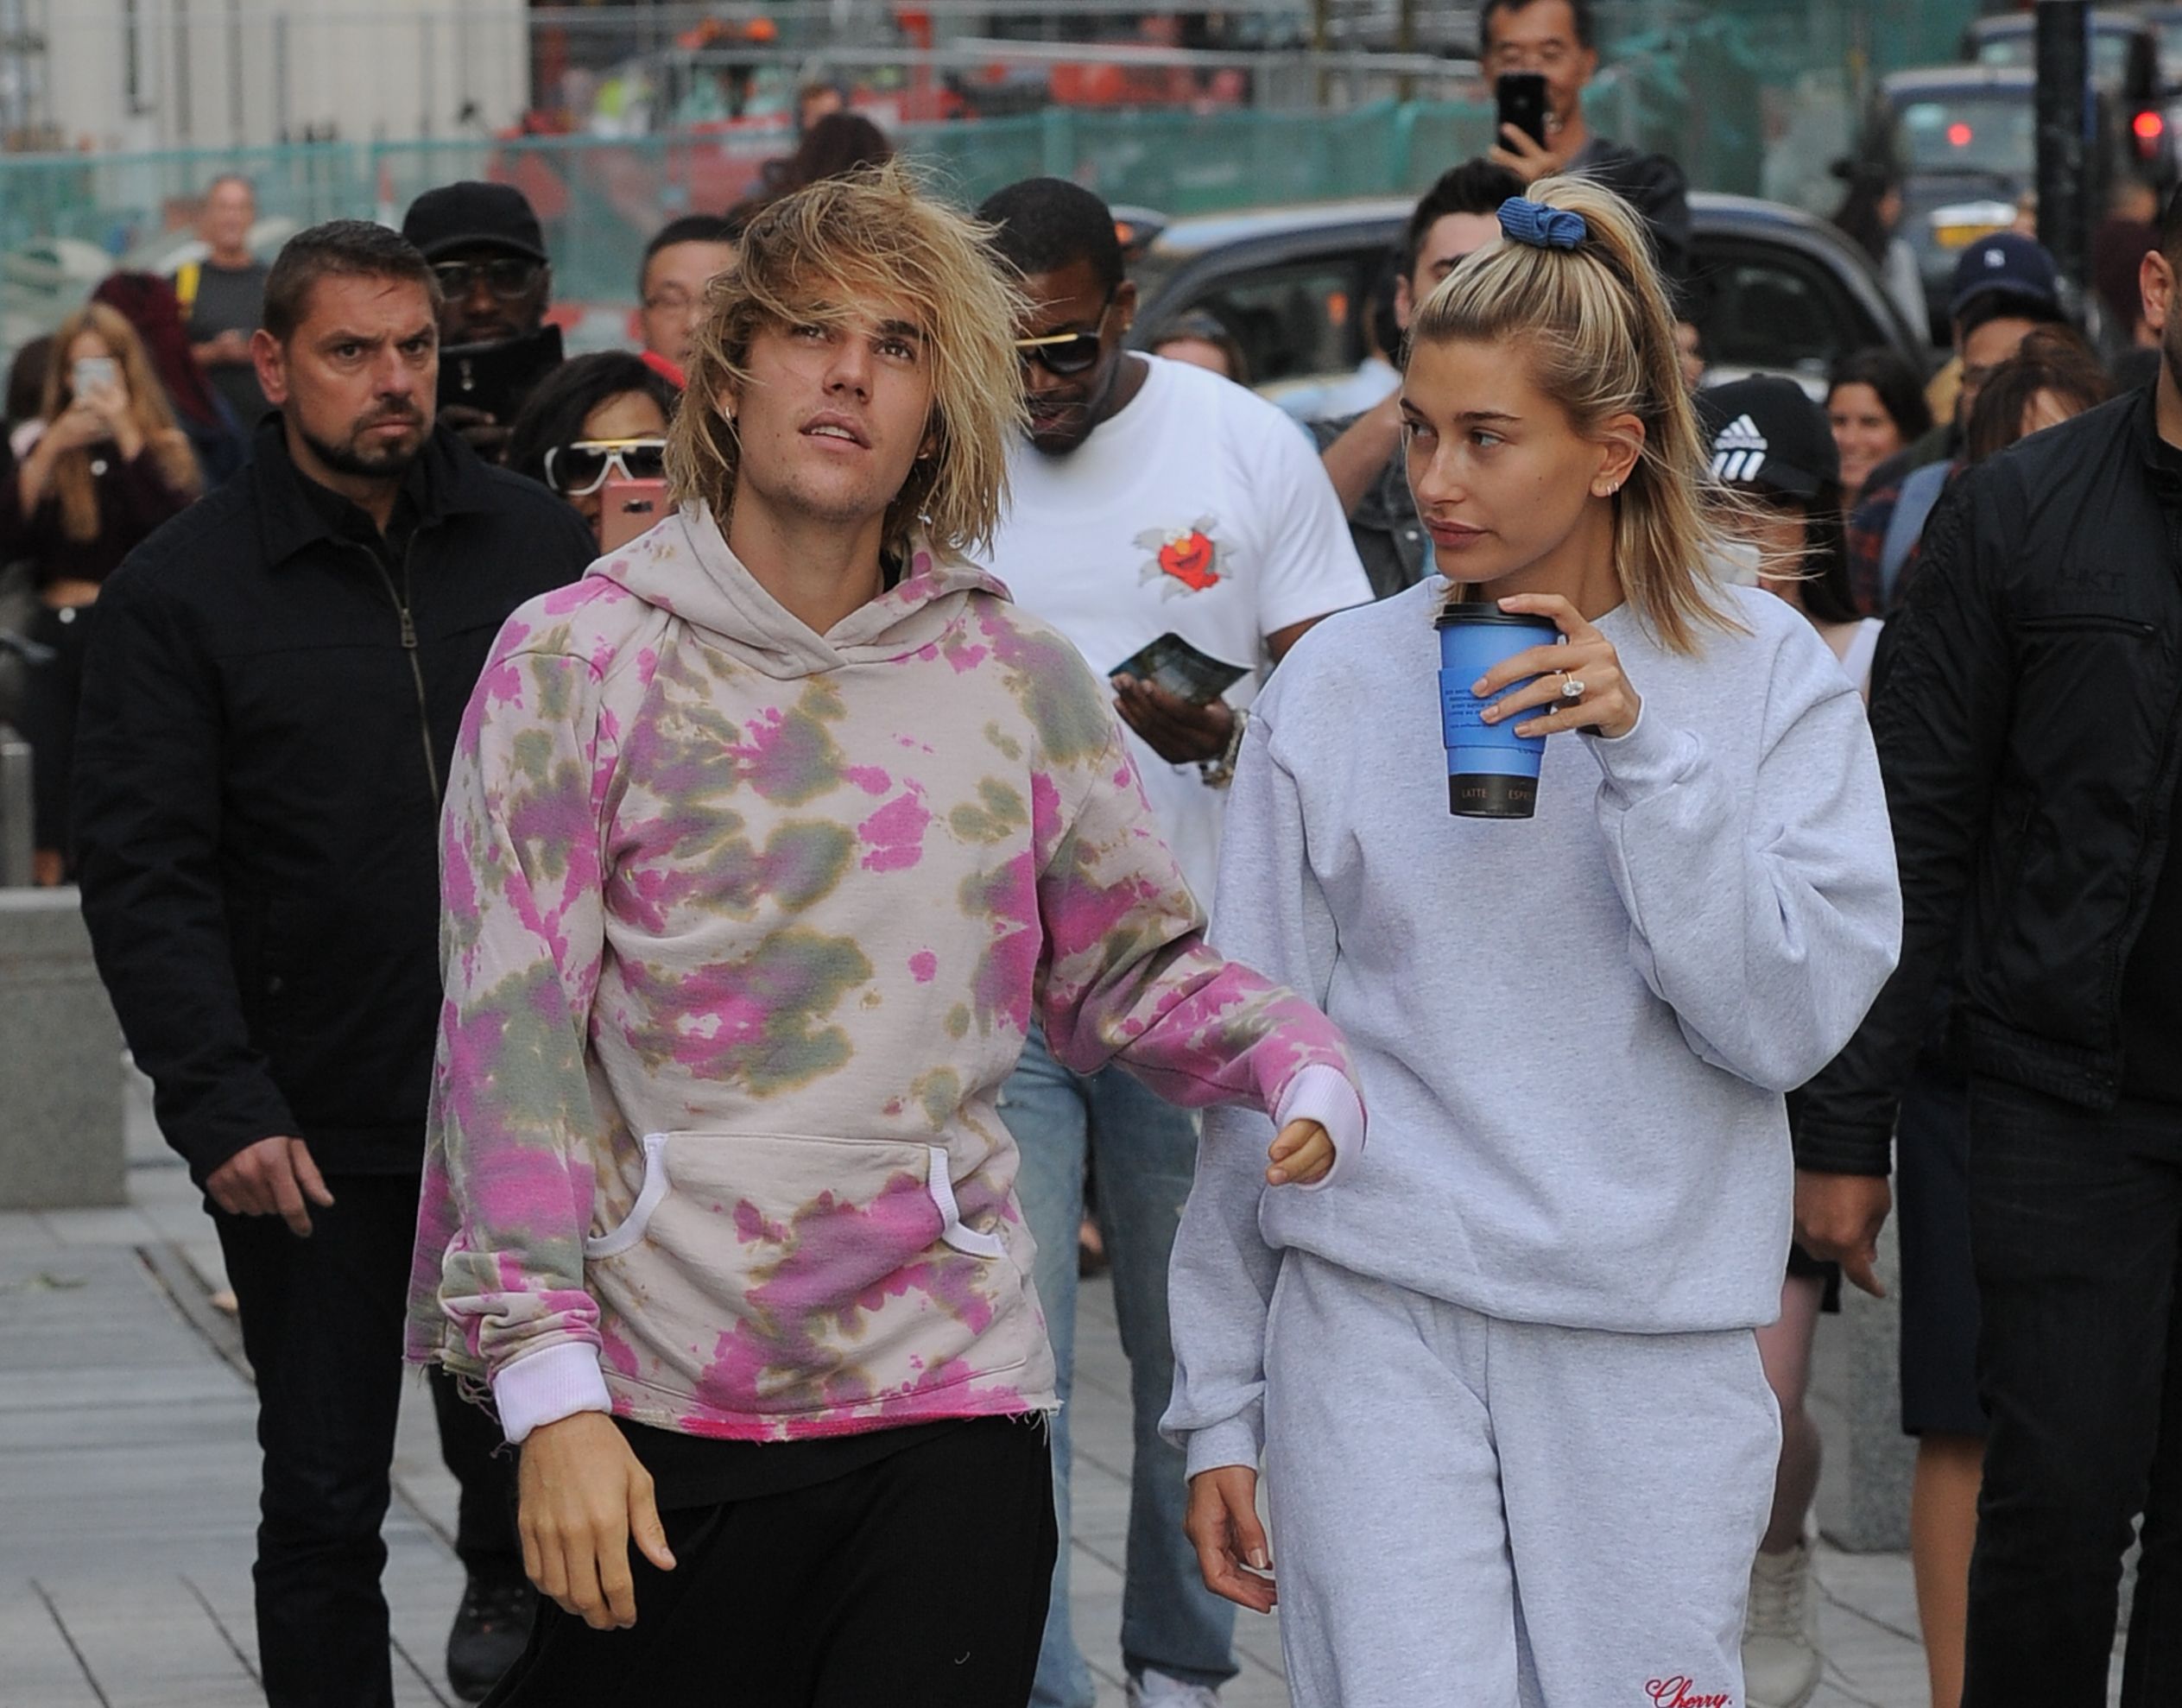 Justin Bieber & Hailey Bieber hit up a Maple Leafs game in Toronto 